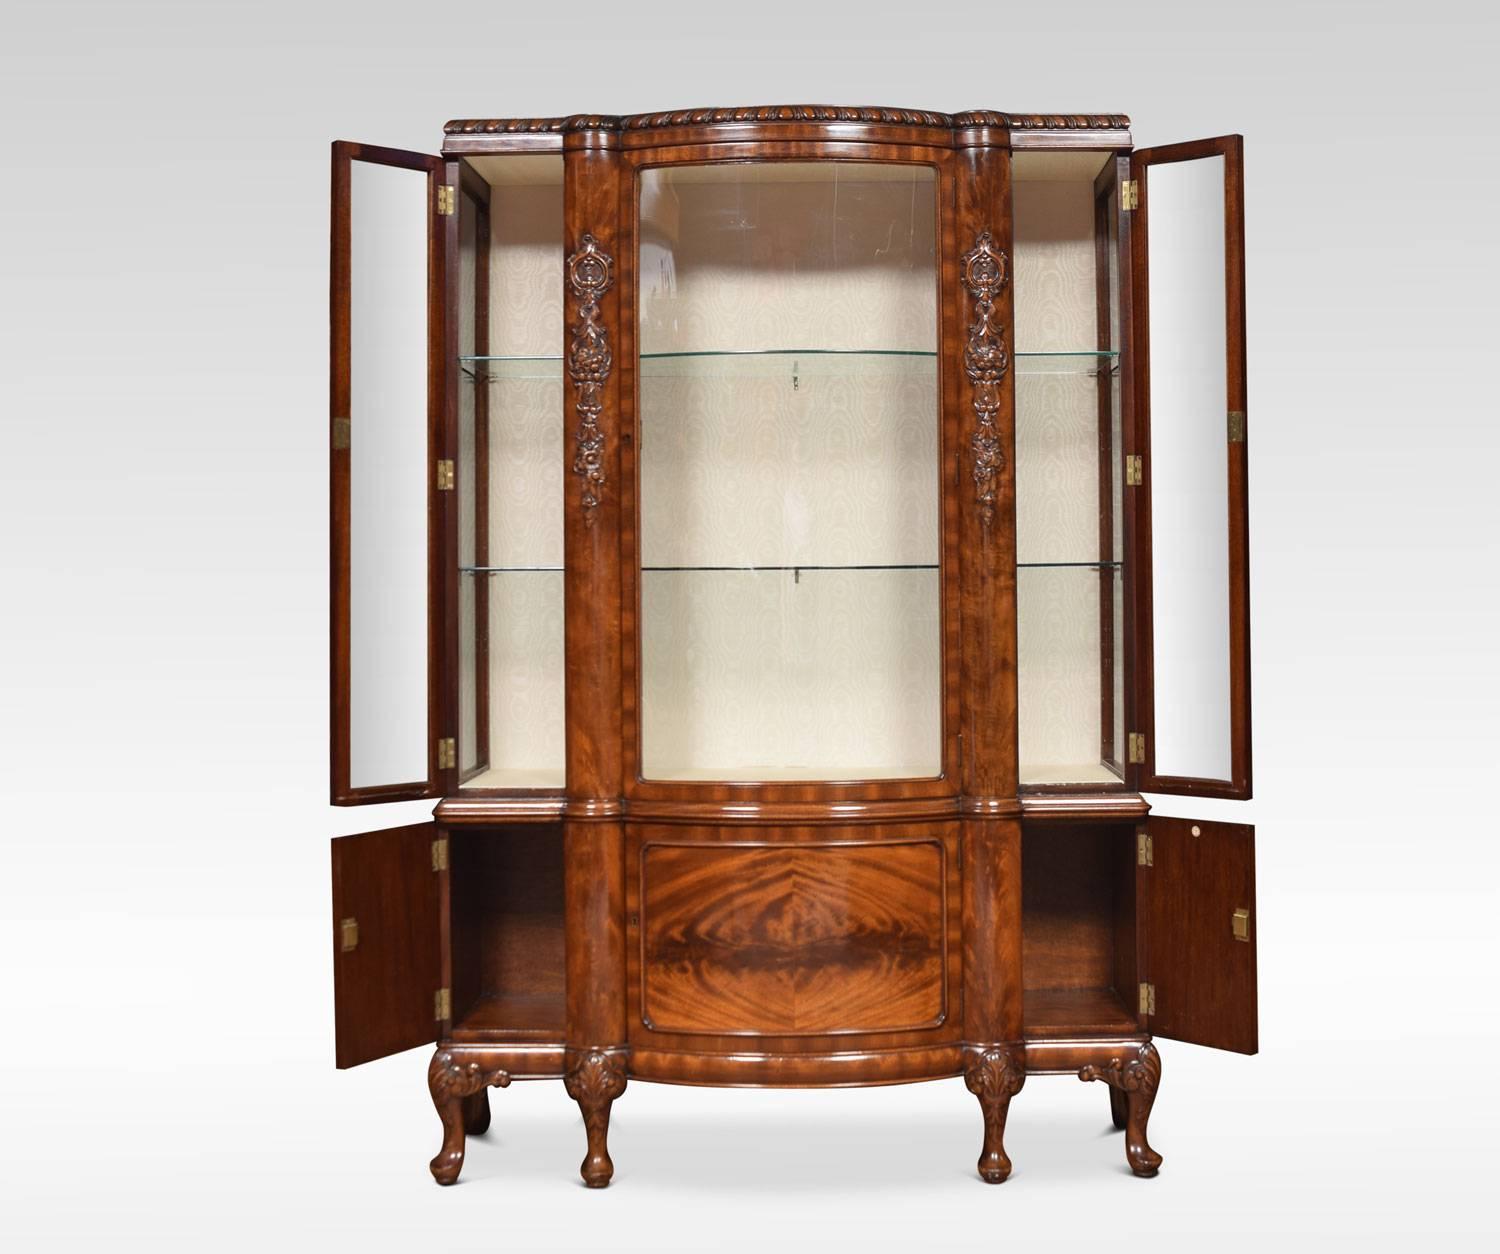 Chippendale revival mahogany bow fronted display cabinet the gradooned top above large central bow fronted door and shorter doors to either side. Flanked by carved scrolls and foliage. The cabinet fitted with two glazed shelves. The base section